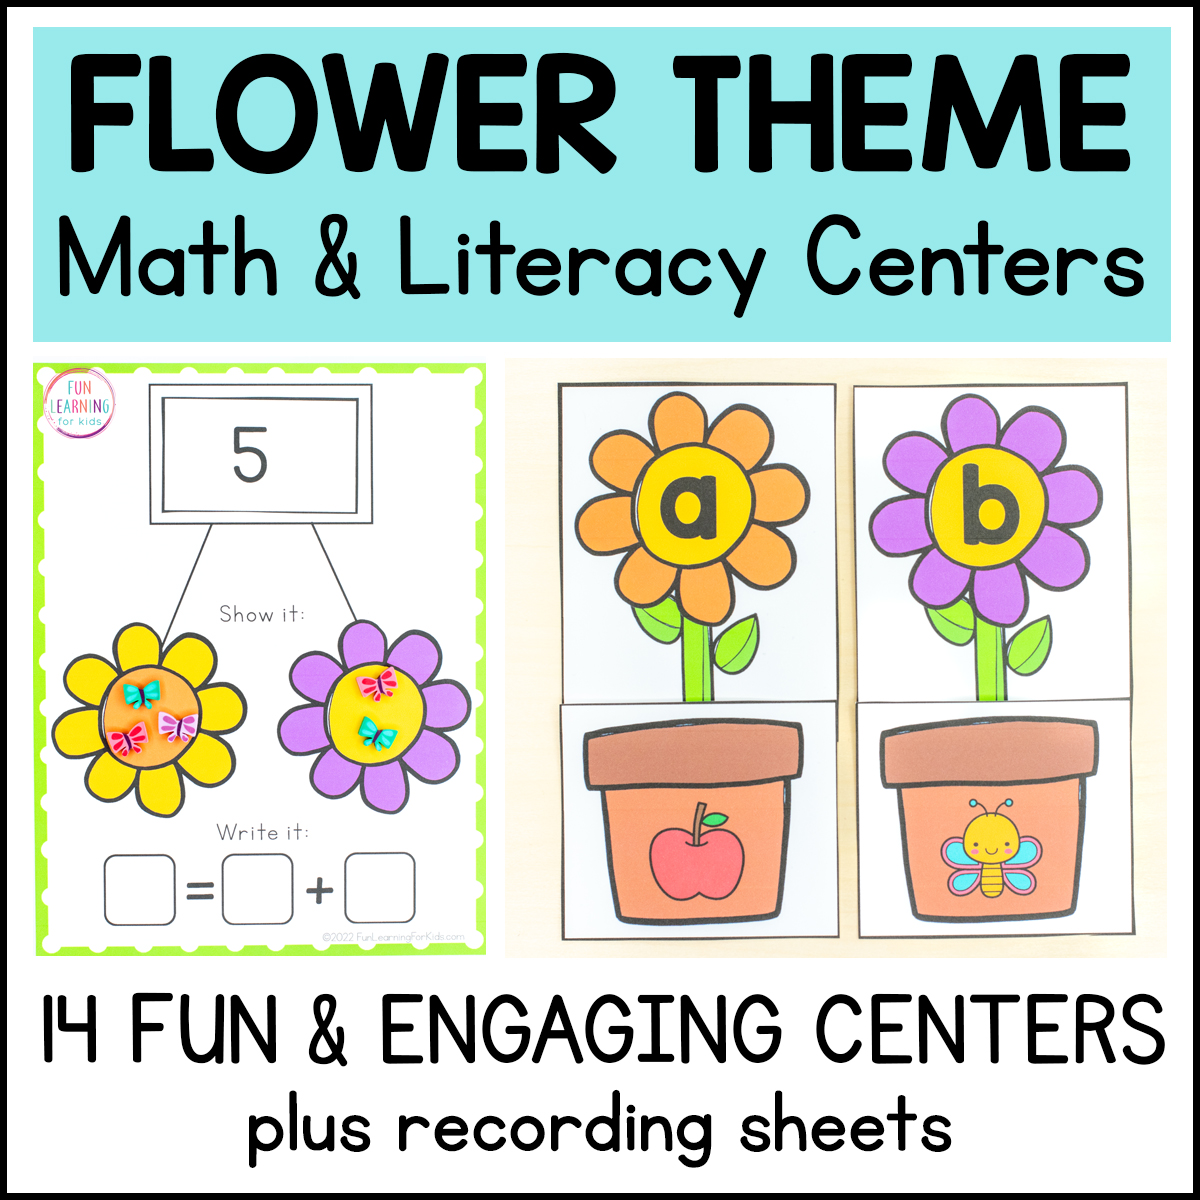 Flower-Theme-Math-and-Literacy-Centers-Main-1